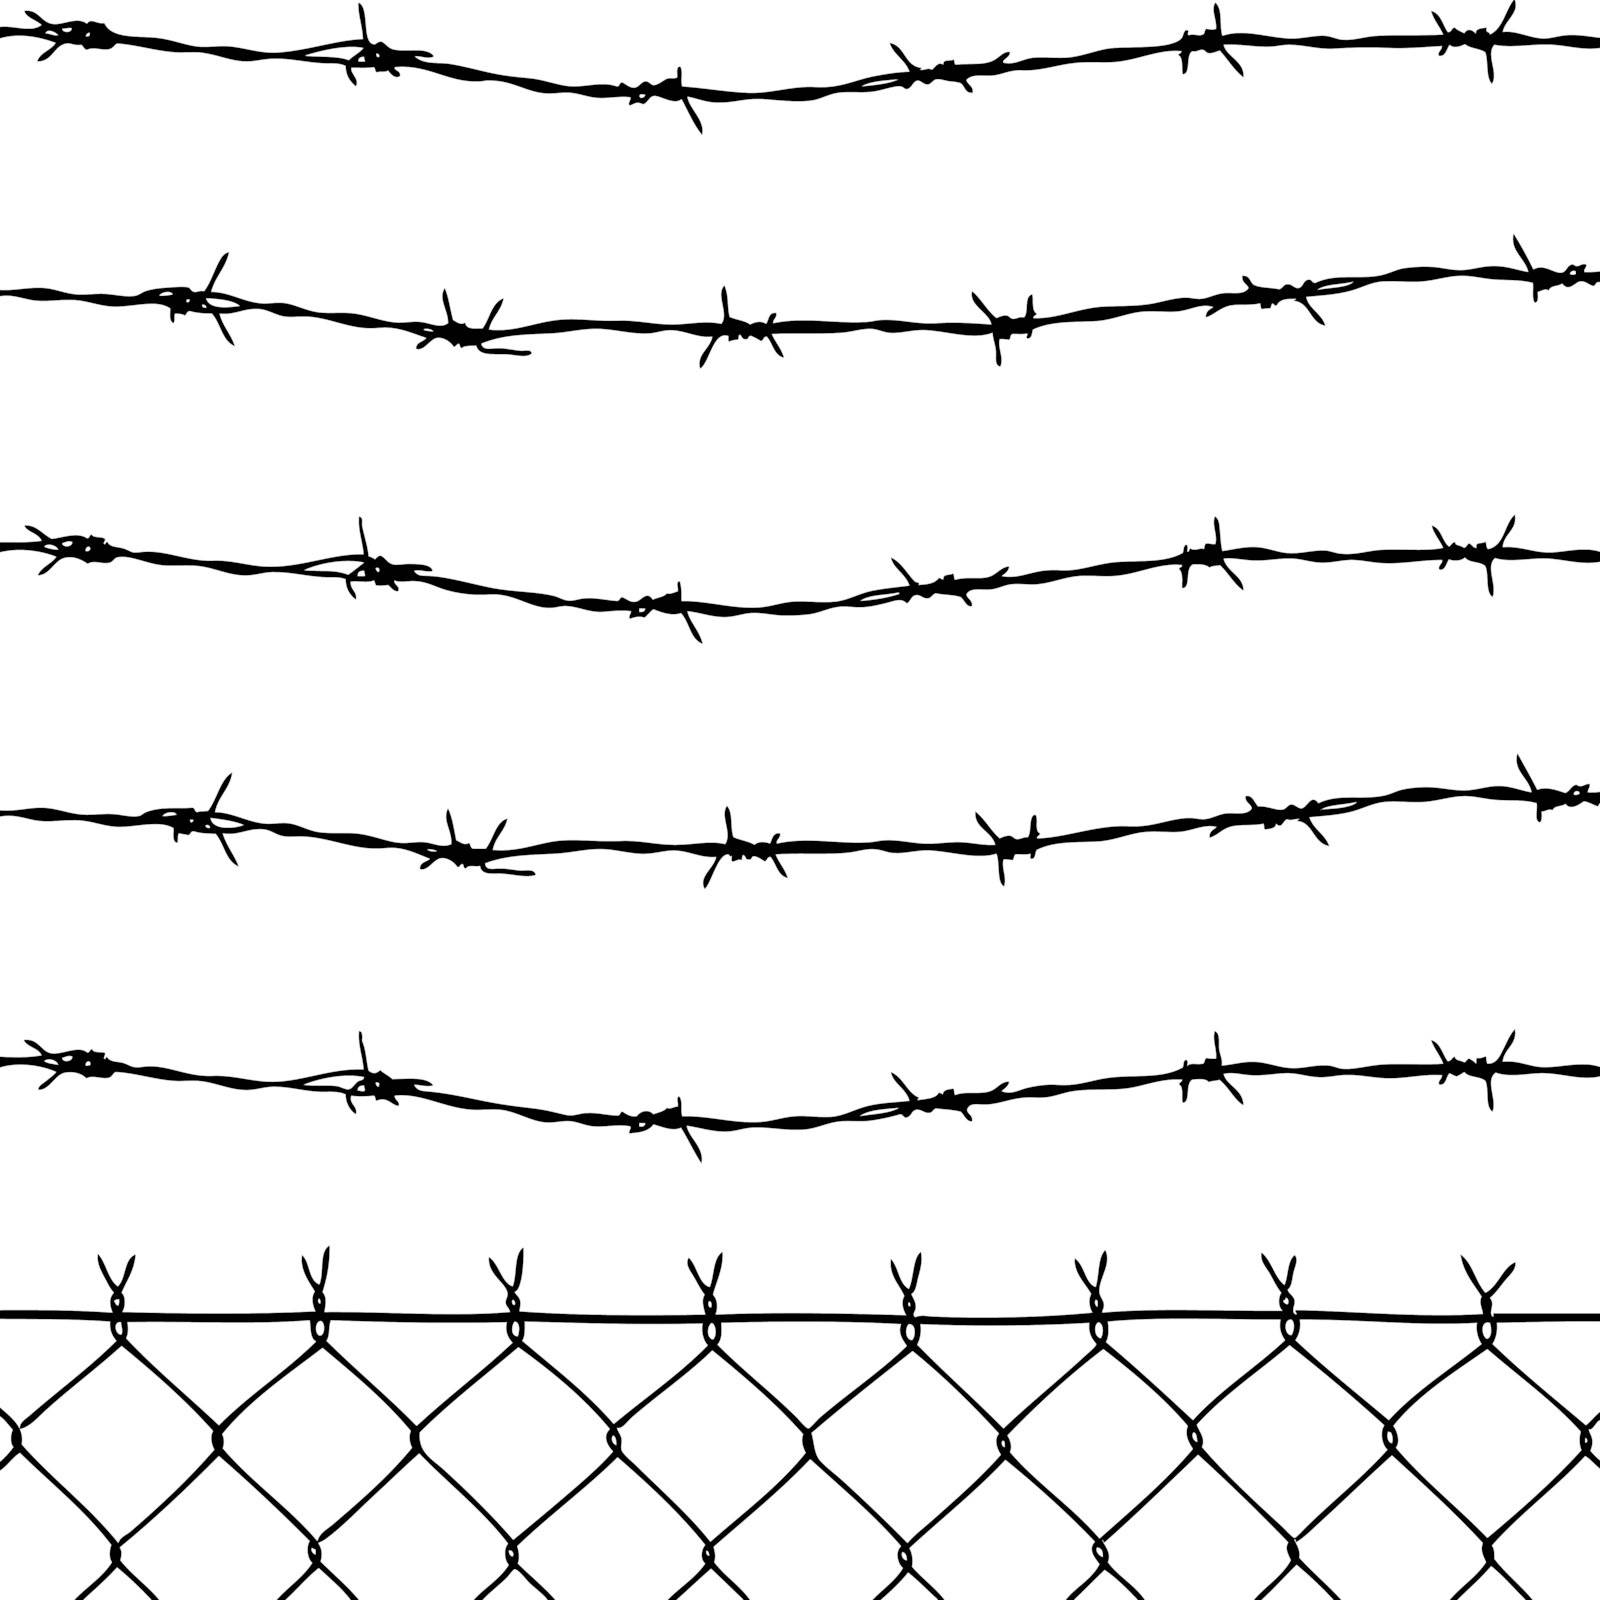 wired fence with barbed wires by zhu_zhu